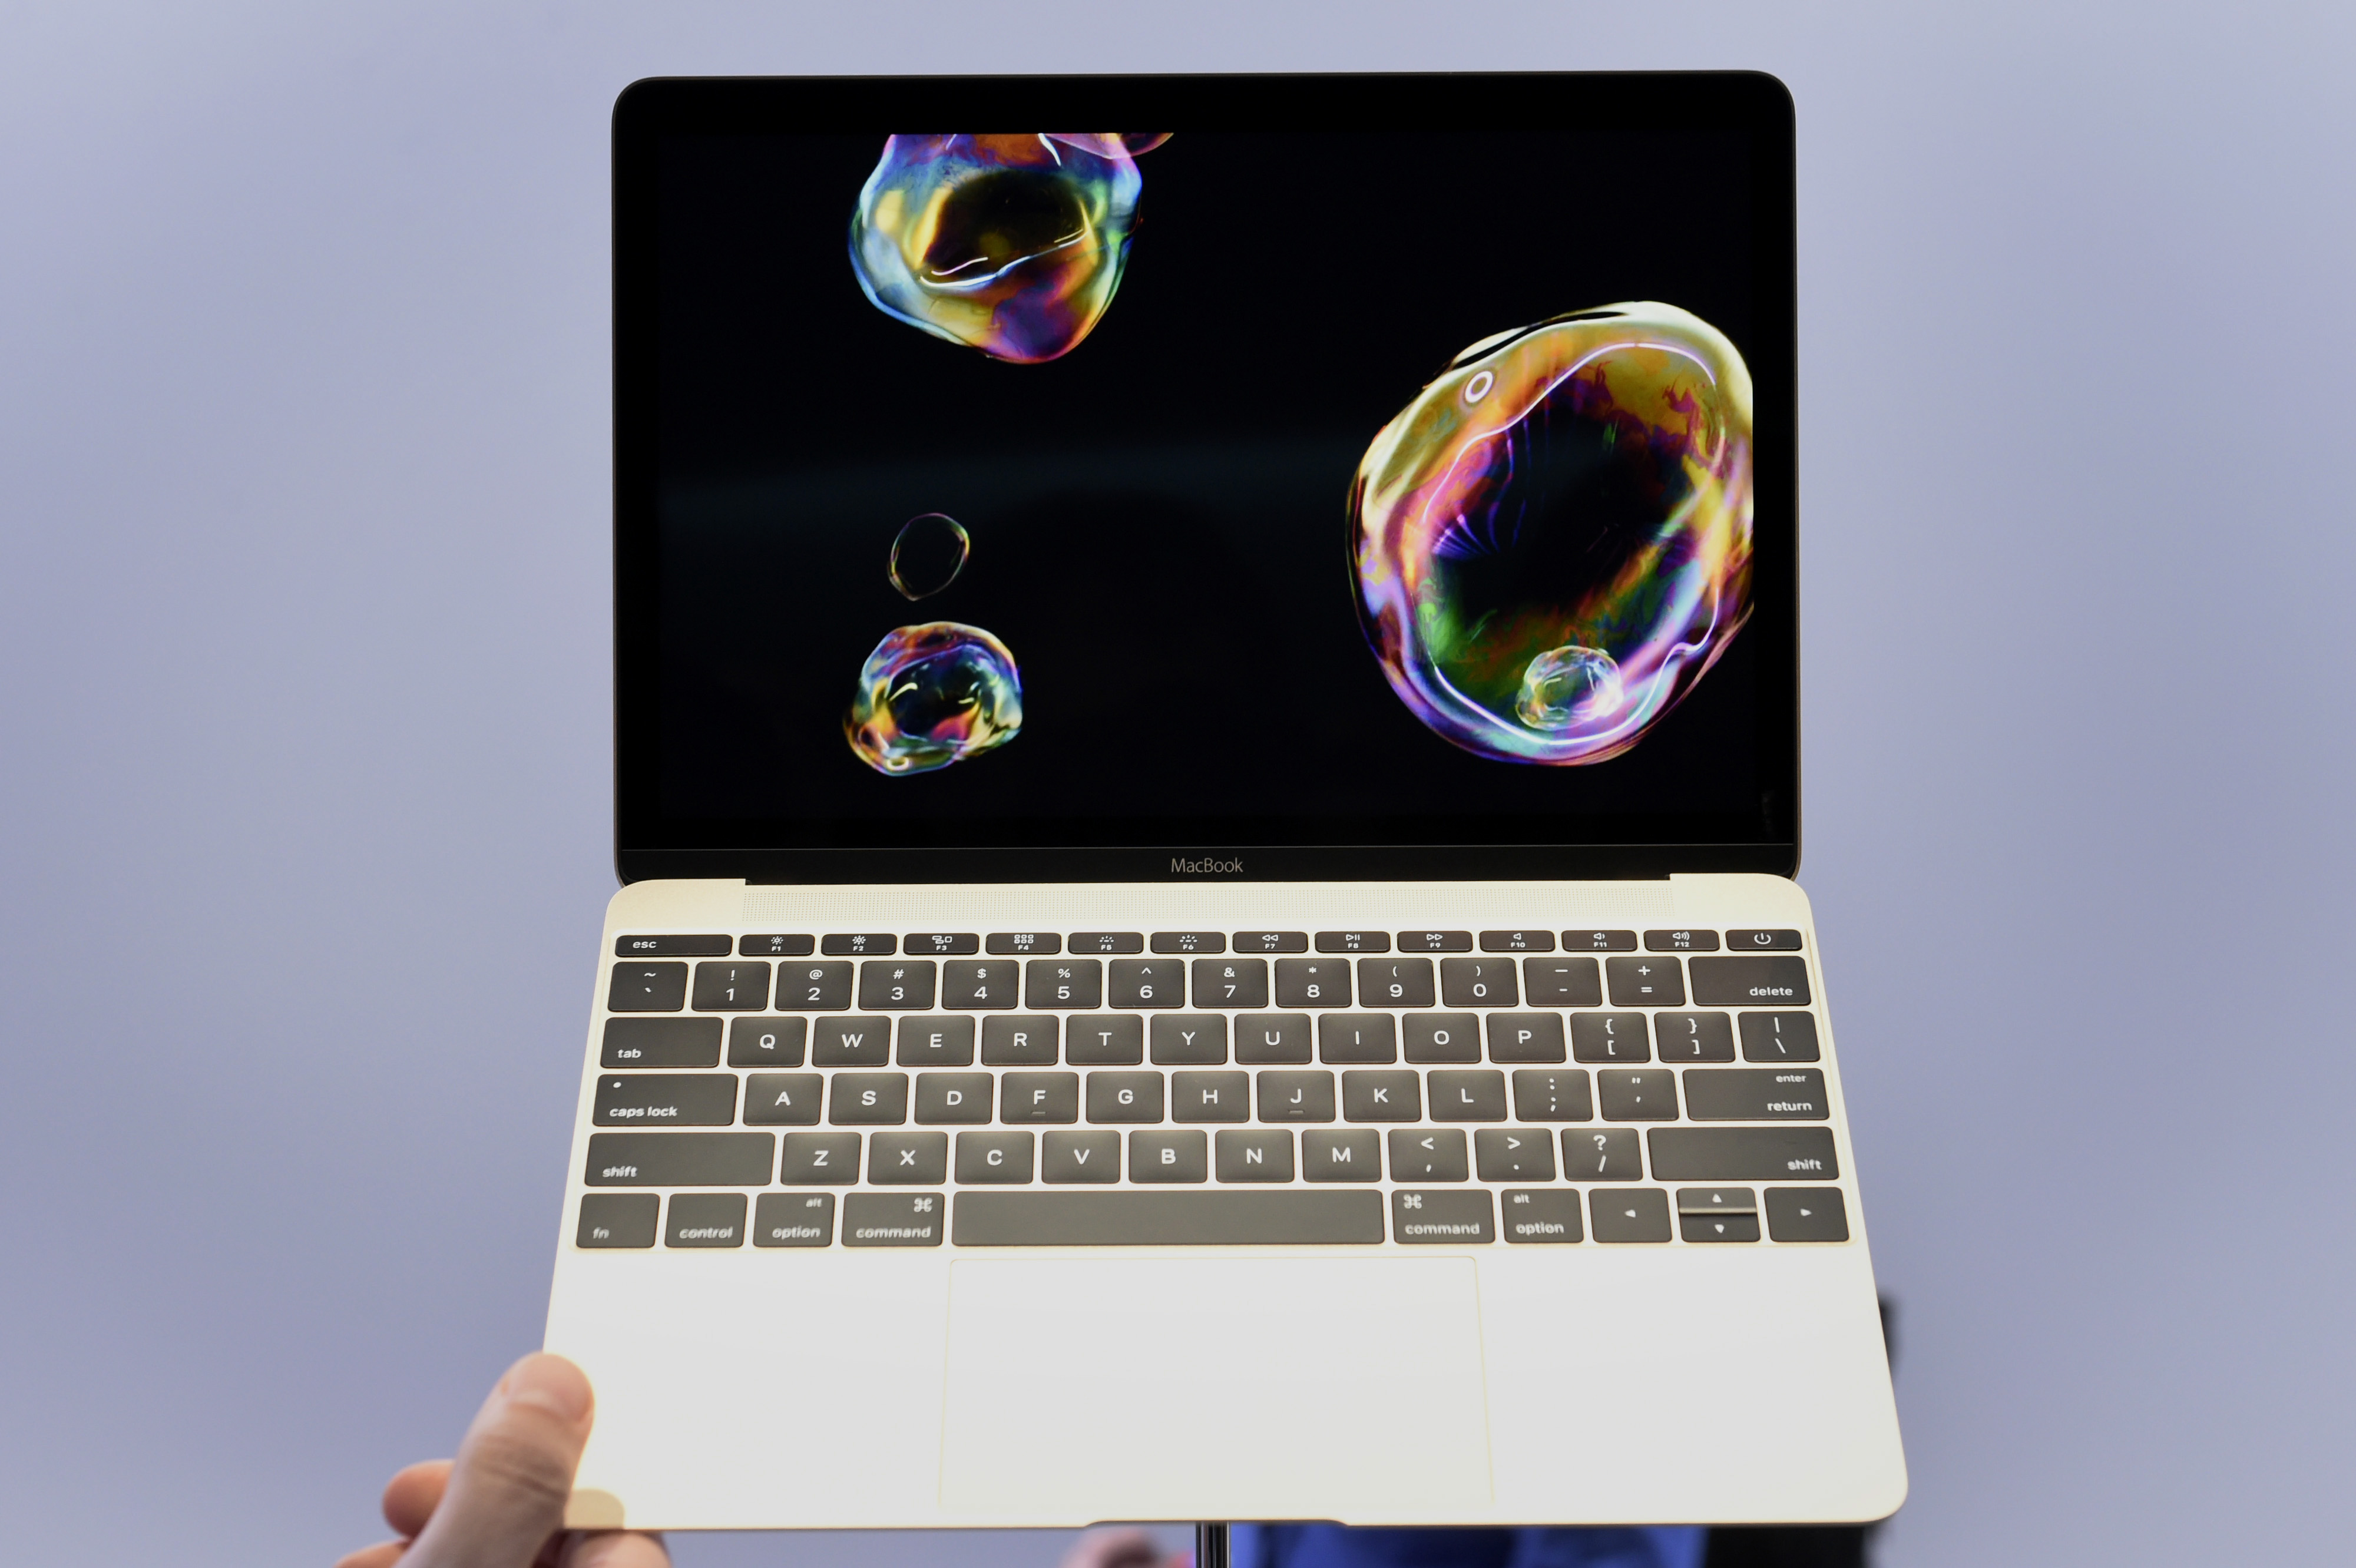 The new gold edition Macbook laptop is displayed during the Apple Inc. Spring Forward event in San Francisco, California, U.S., on Monday, March 9, 2015. (David Paul Morris—© 2015 Bloomberg Finance LP)